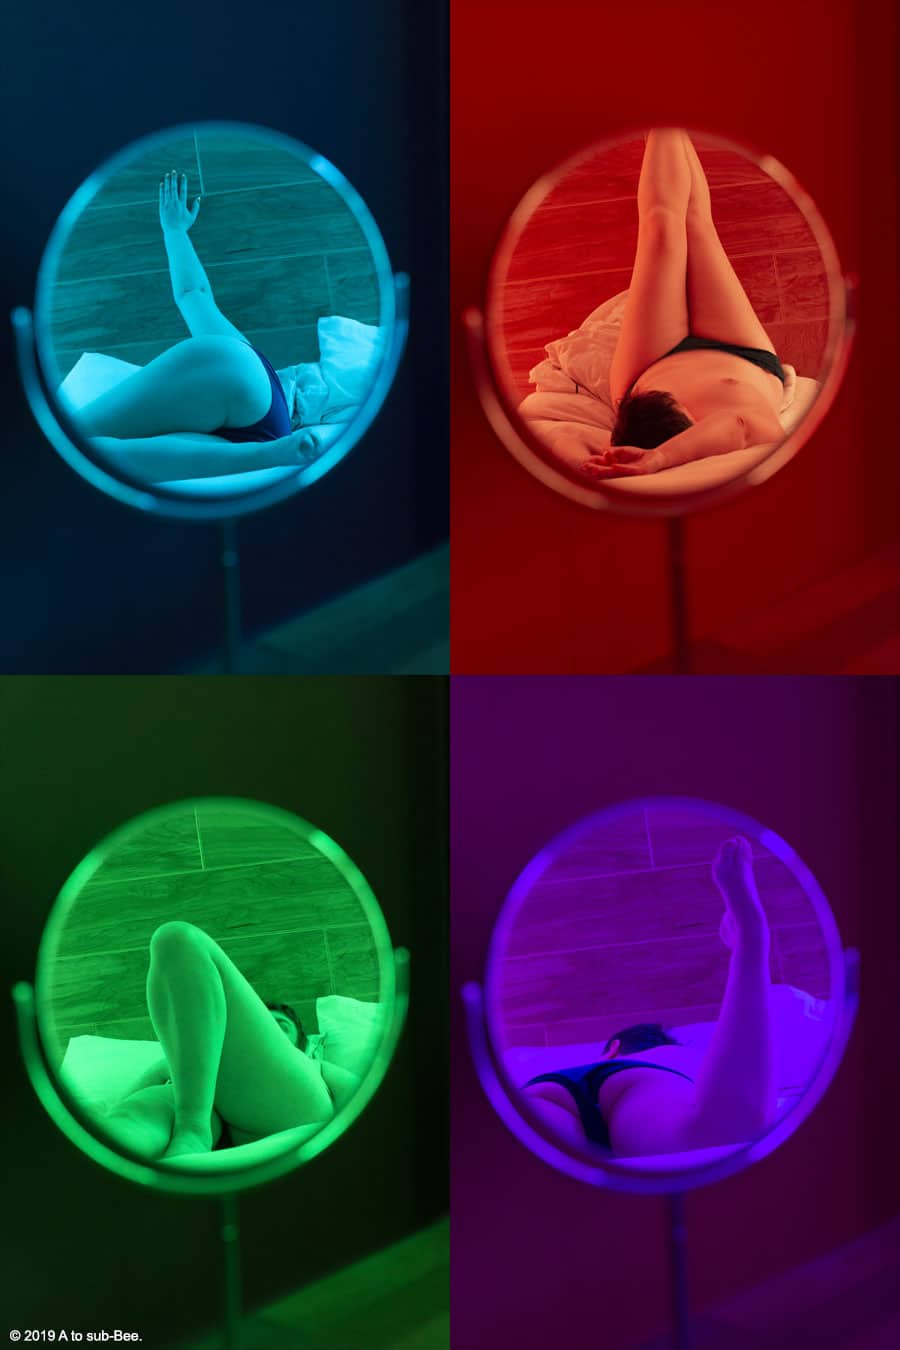 Four images of Bee posing in a mirror in blue, red, green and purple